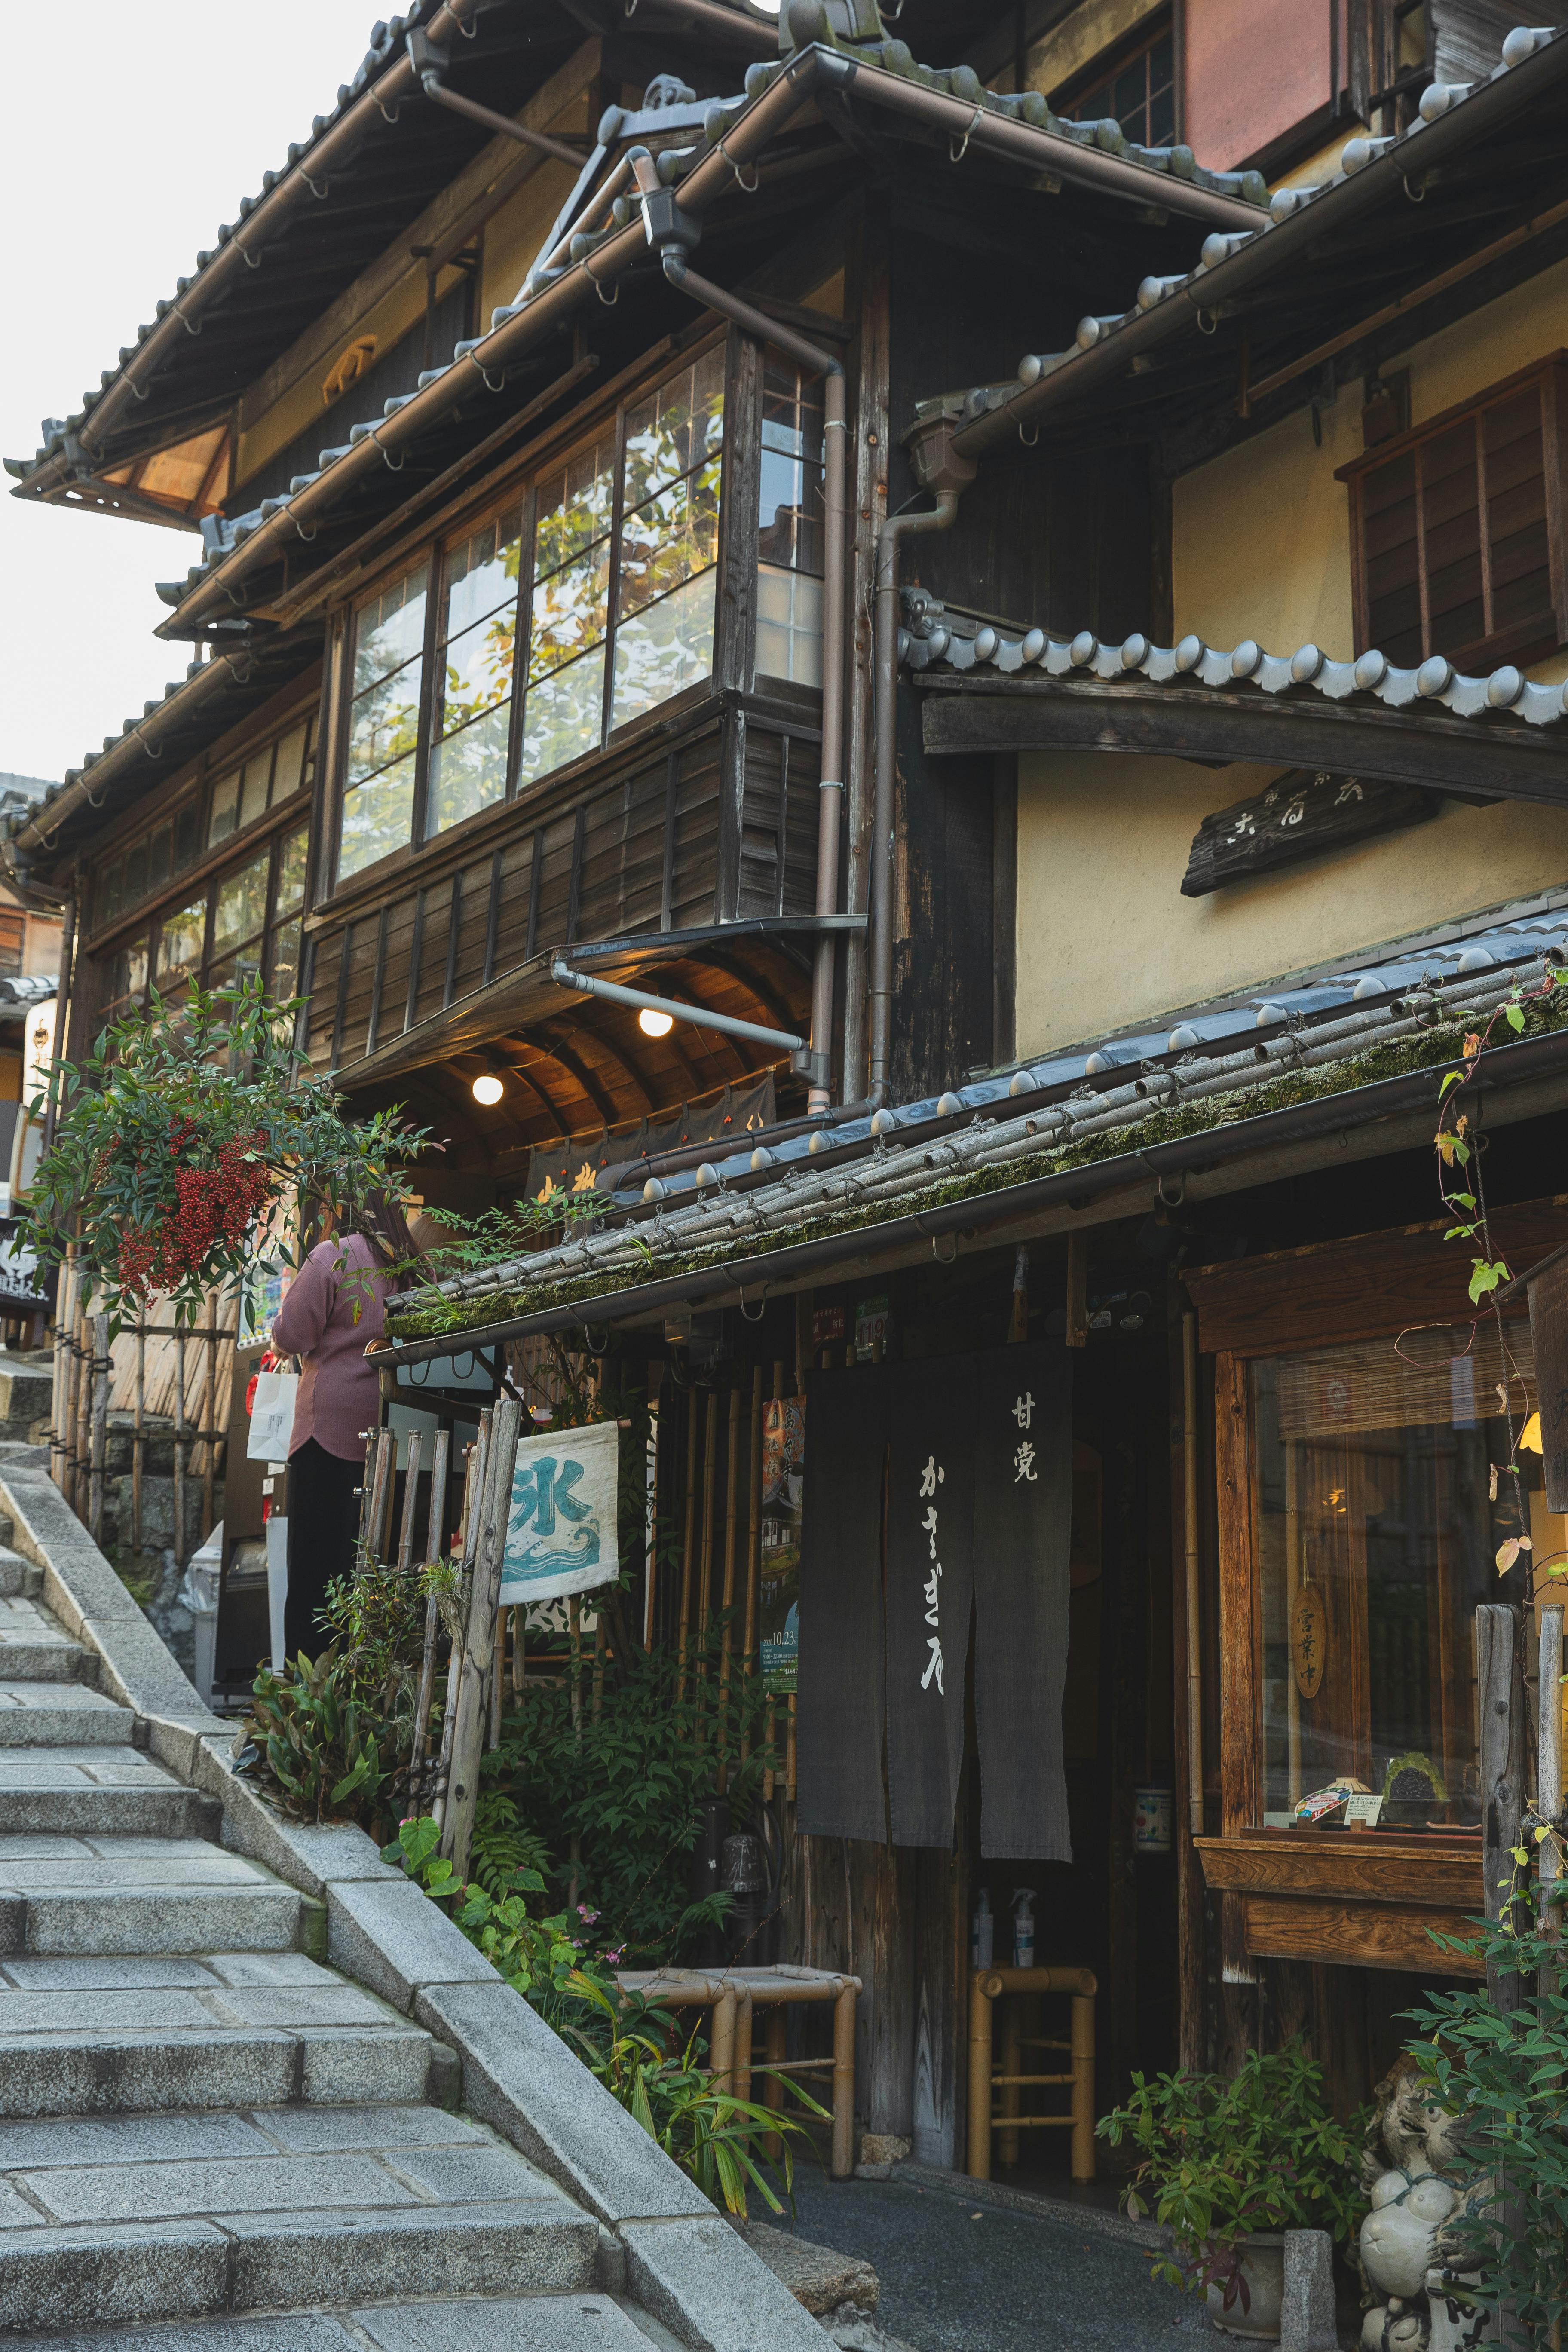 authentic wooden houses in asian town